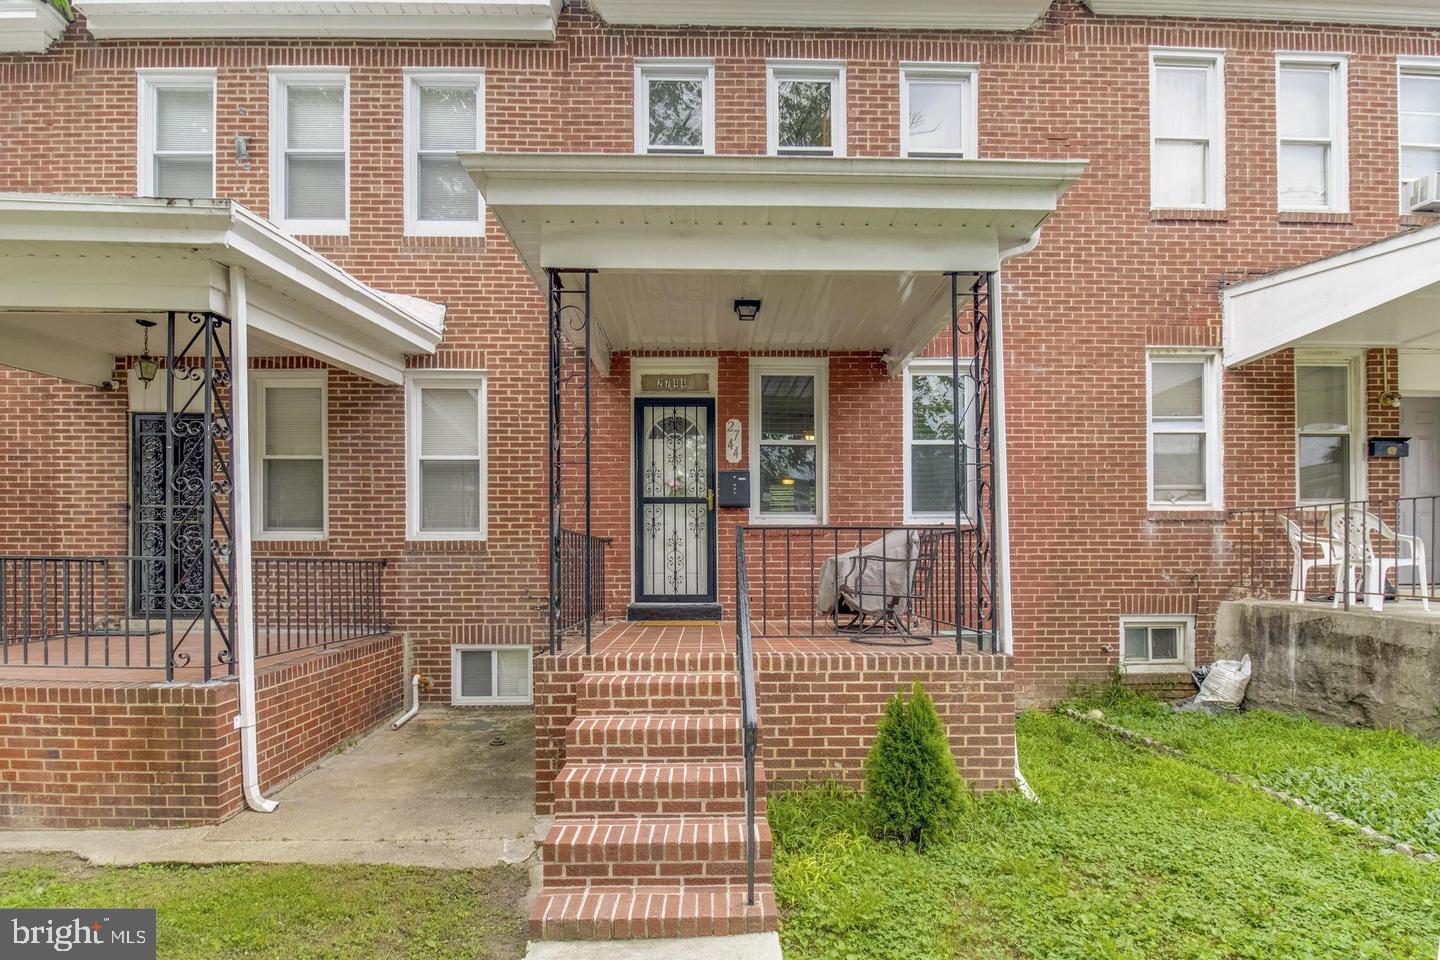 View Baltimore, MD 21216 townhome